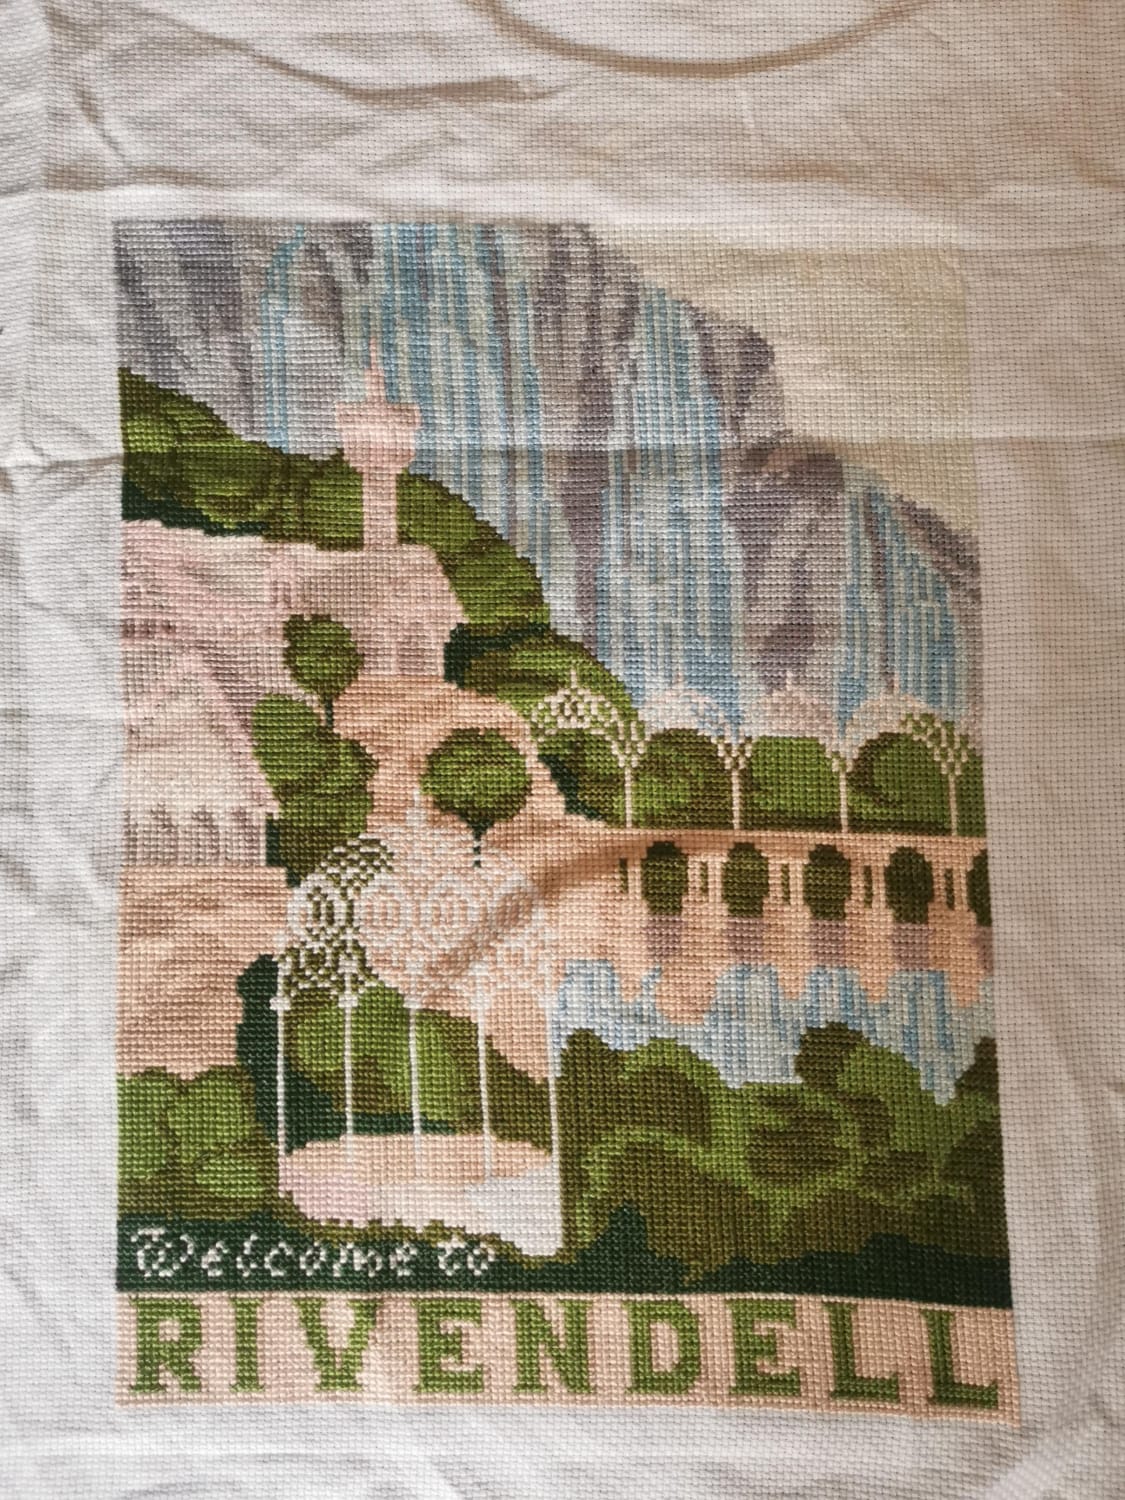 [FO] Started with this in late May and just finished. I tried to have a neat backside. I think it worked out pretty well. What do you think? Pattern by CountryMagicStitch from etsy (welcome to Rivendell)